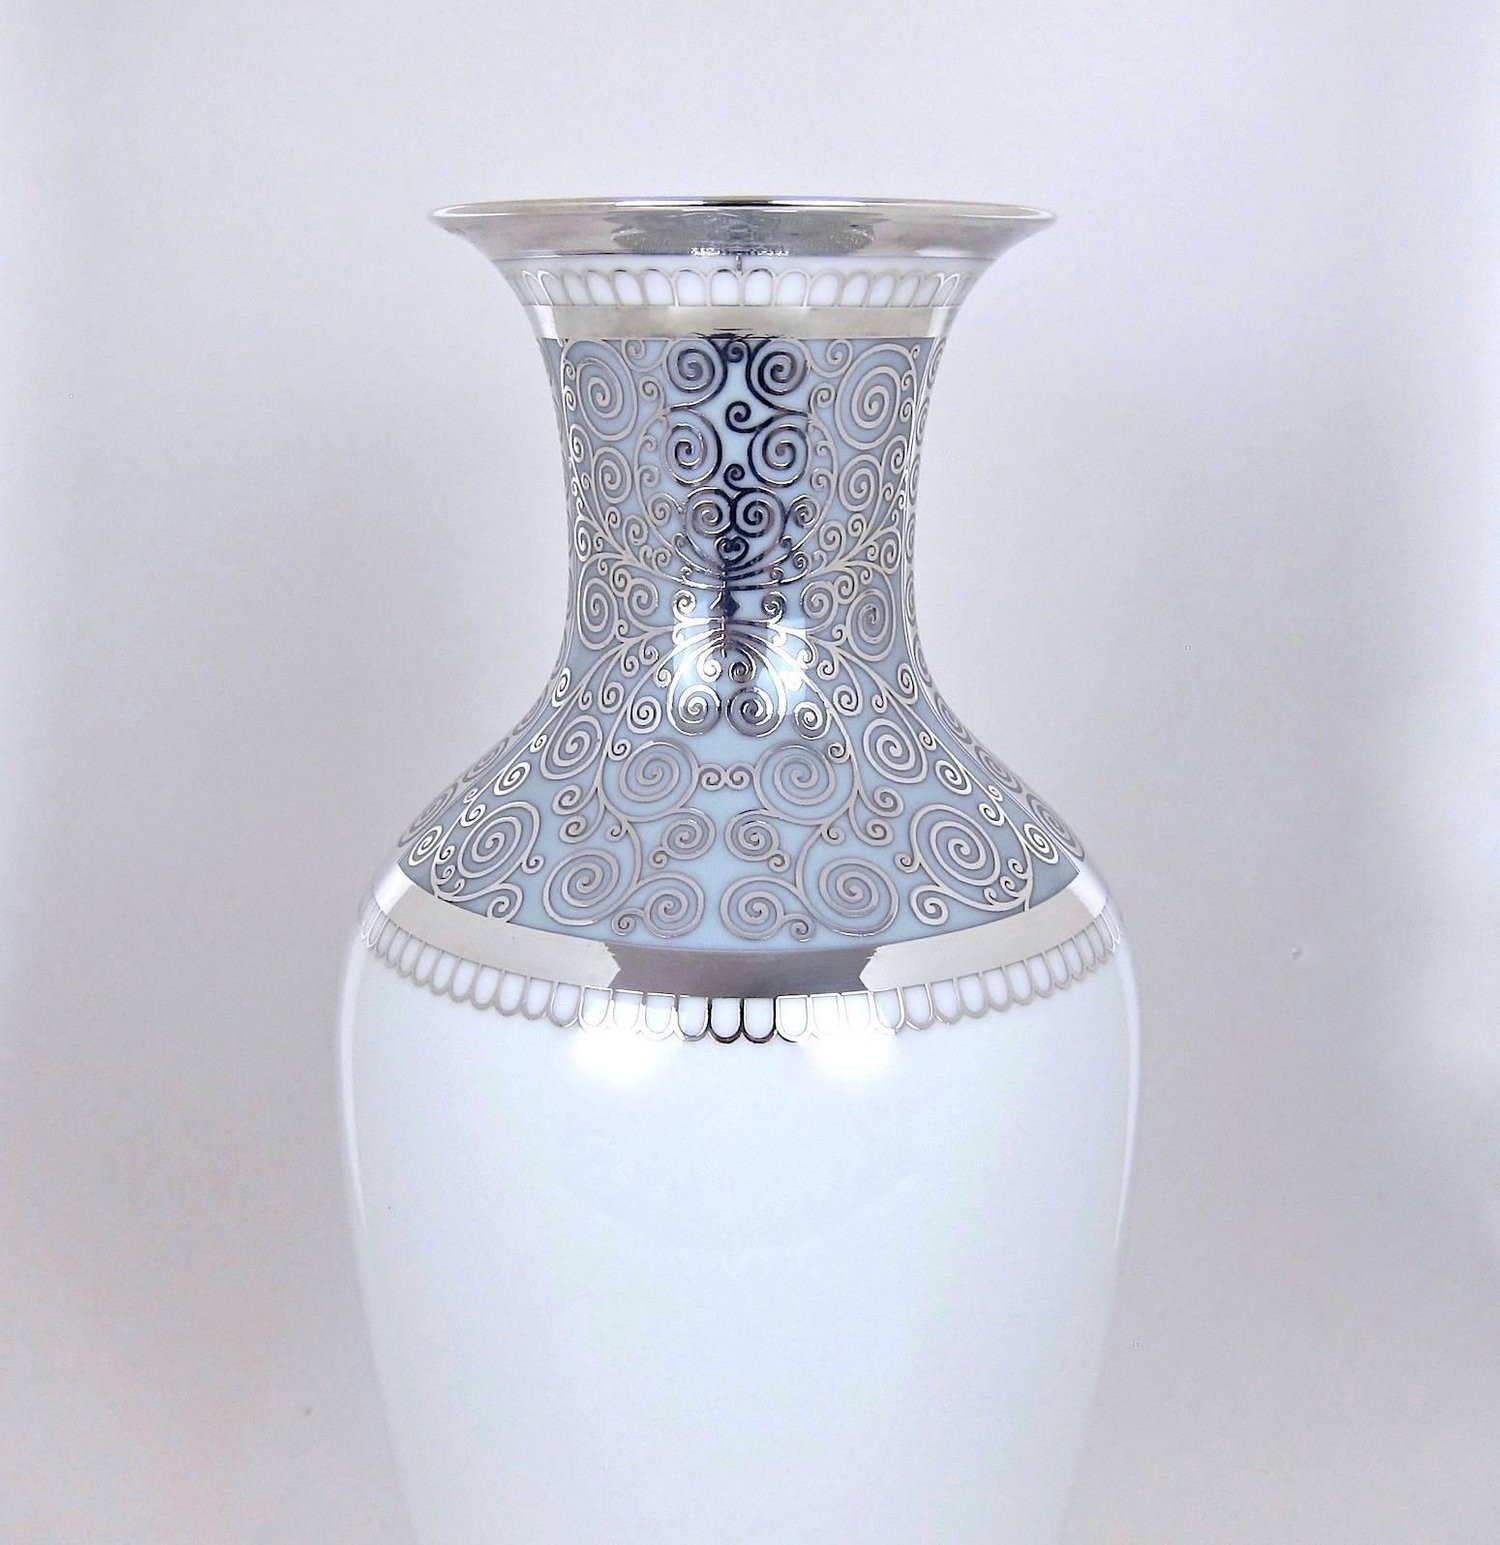 18 attractive Small Antique Glass Vases 2024 free download small antique glass vases of large rosenthal porcelain silver overlay vase at 1stdibs with rosenthal porcelain silver overlay vase 06 master